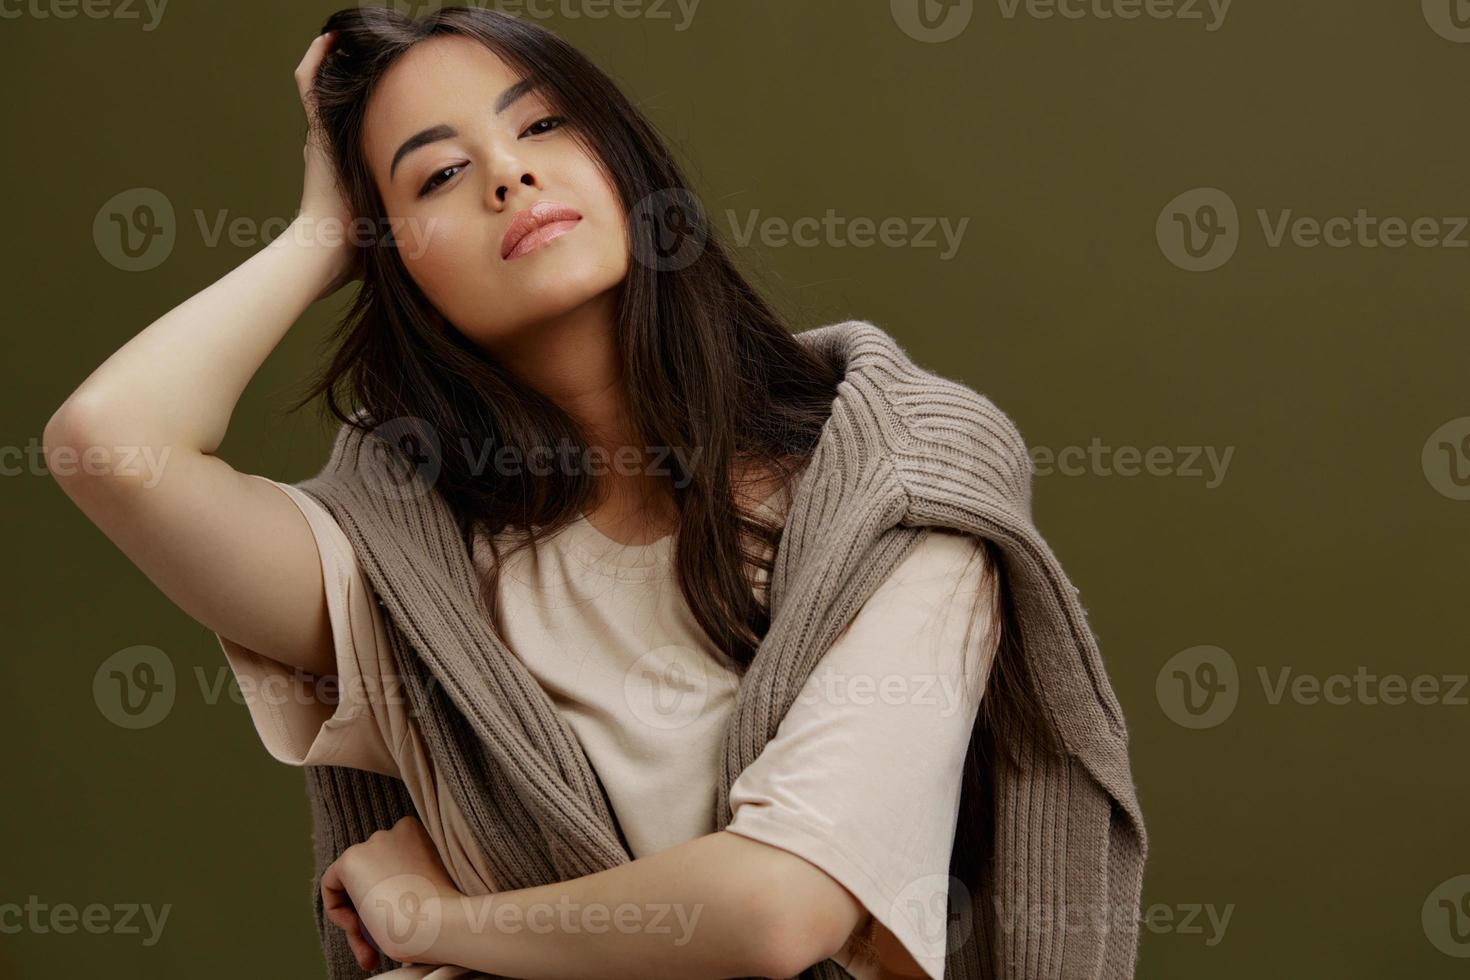 young woman sweater on the shoulders posing clothing fashion isolated background photo